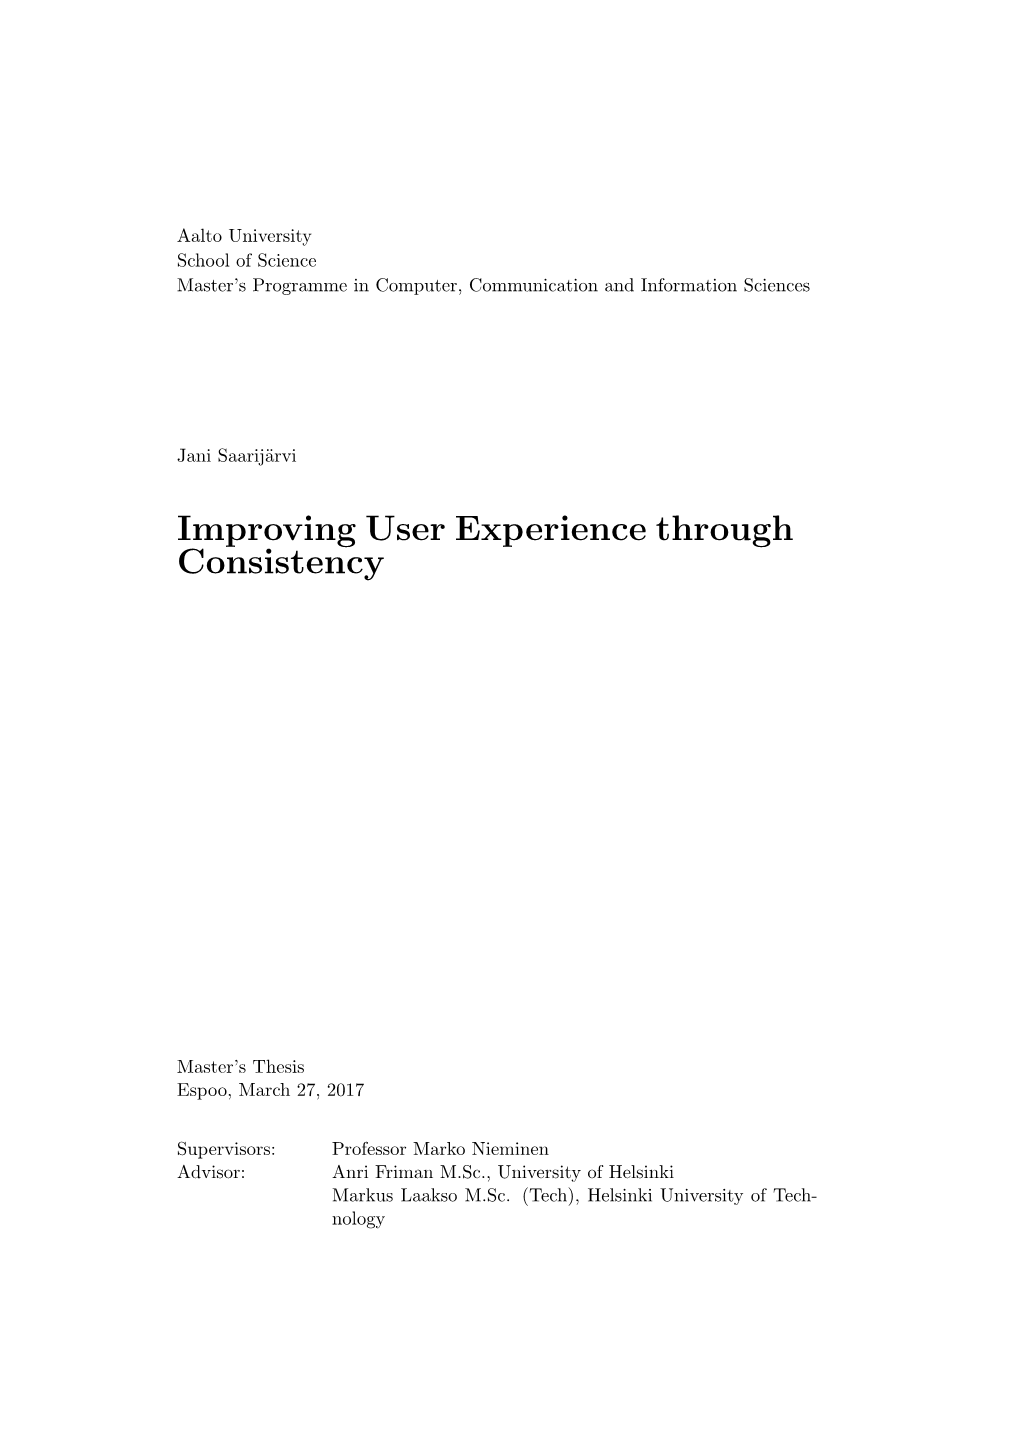 Improving User Experience Through Consistency